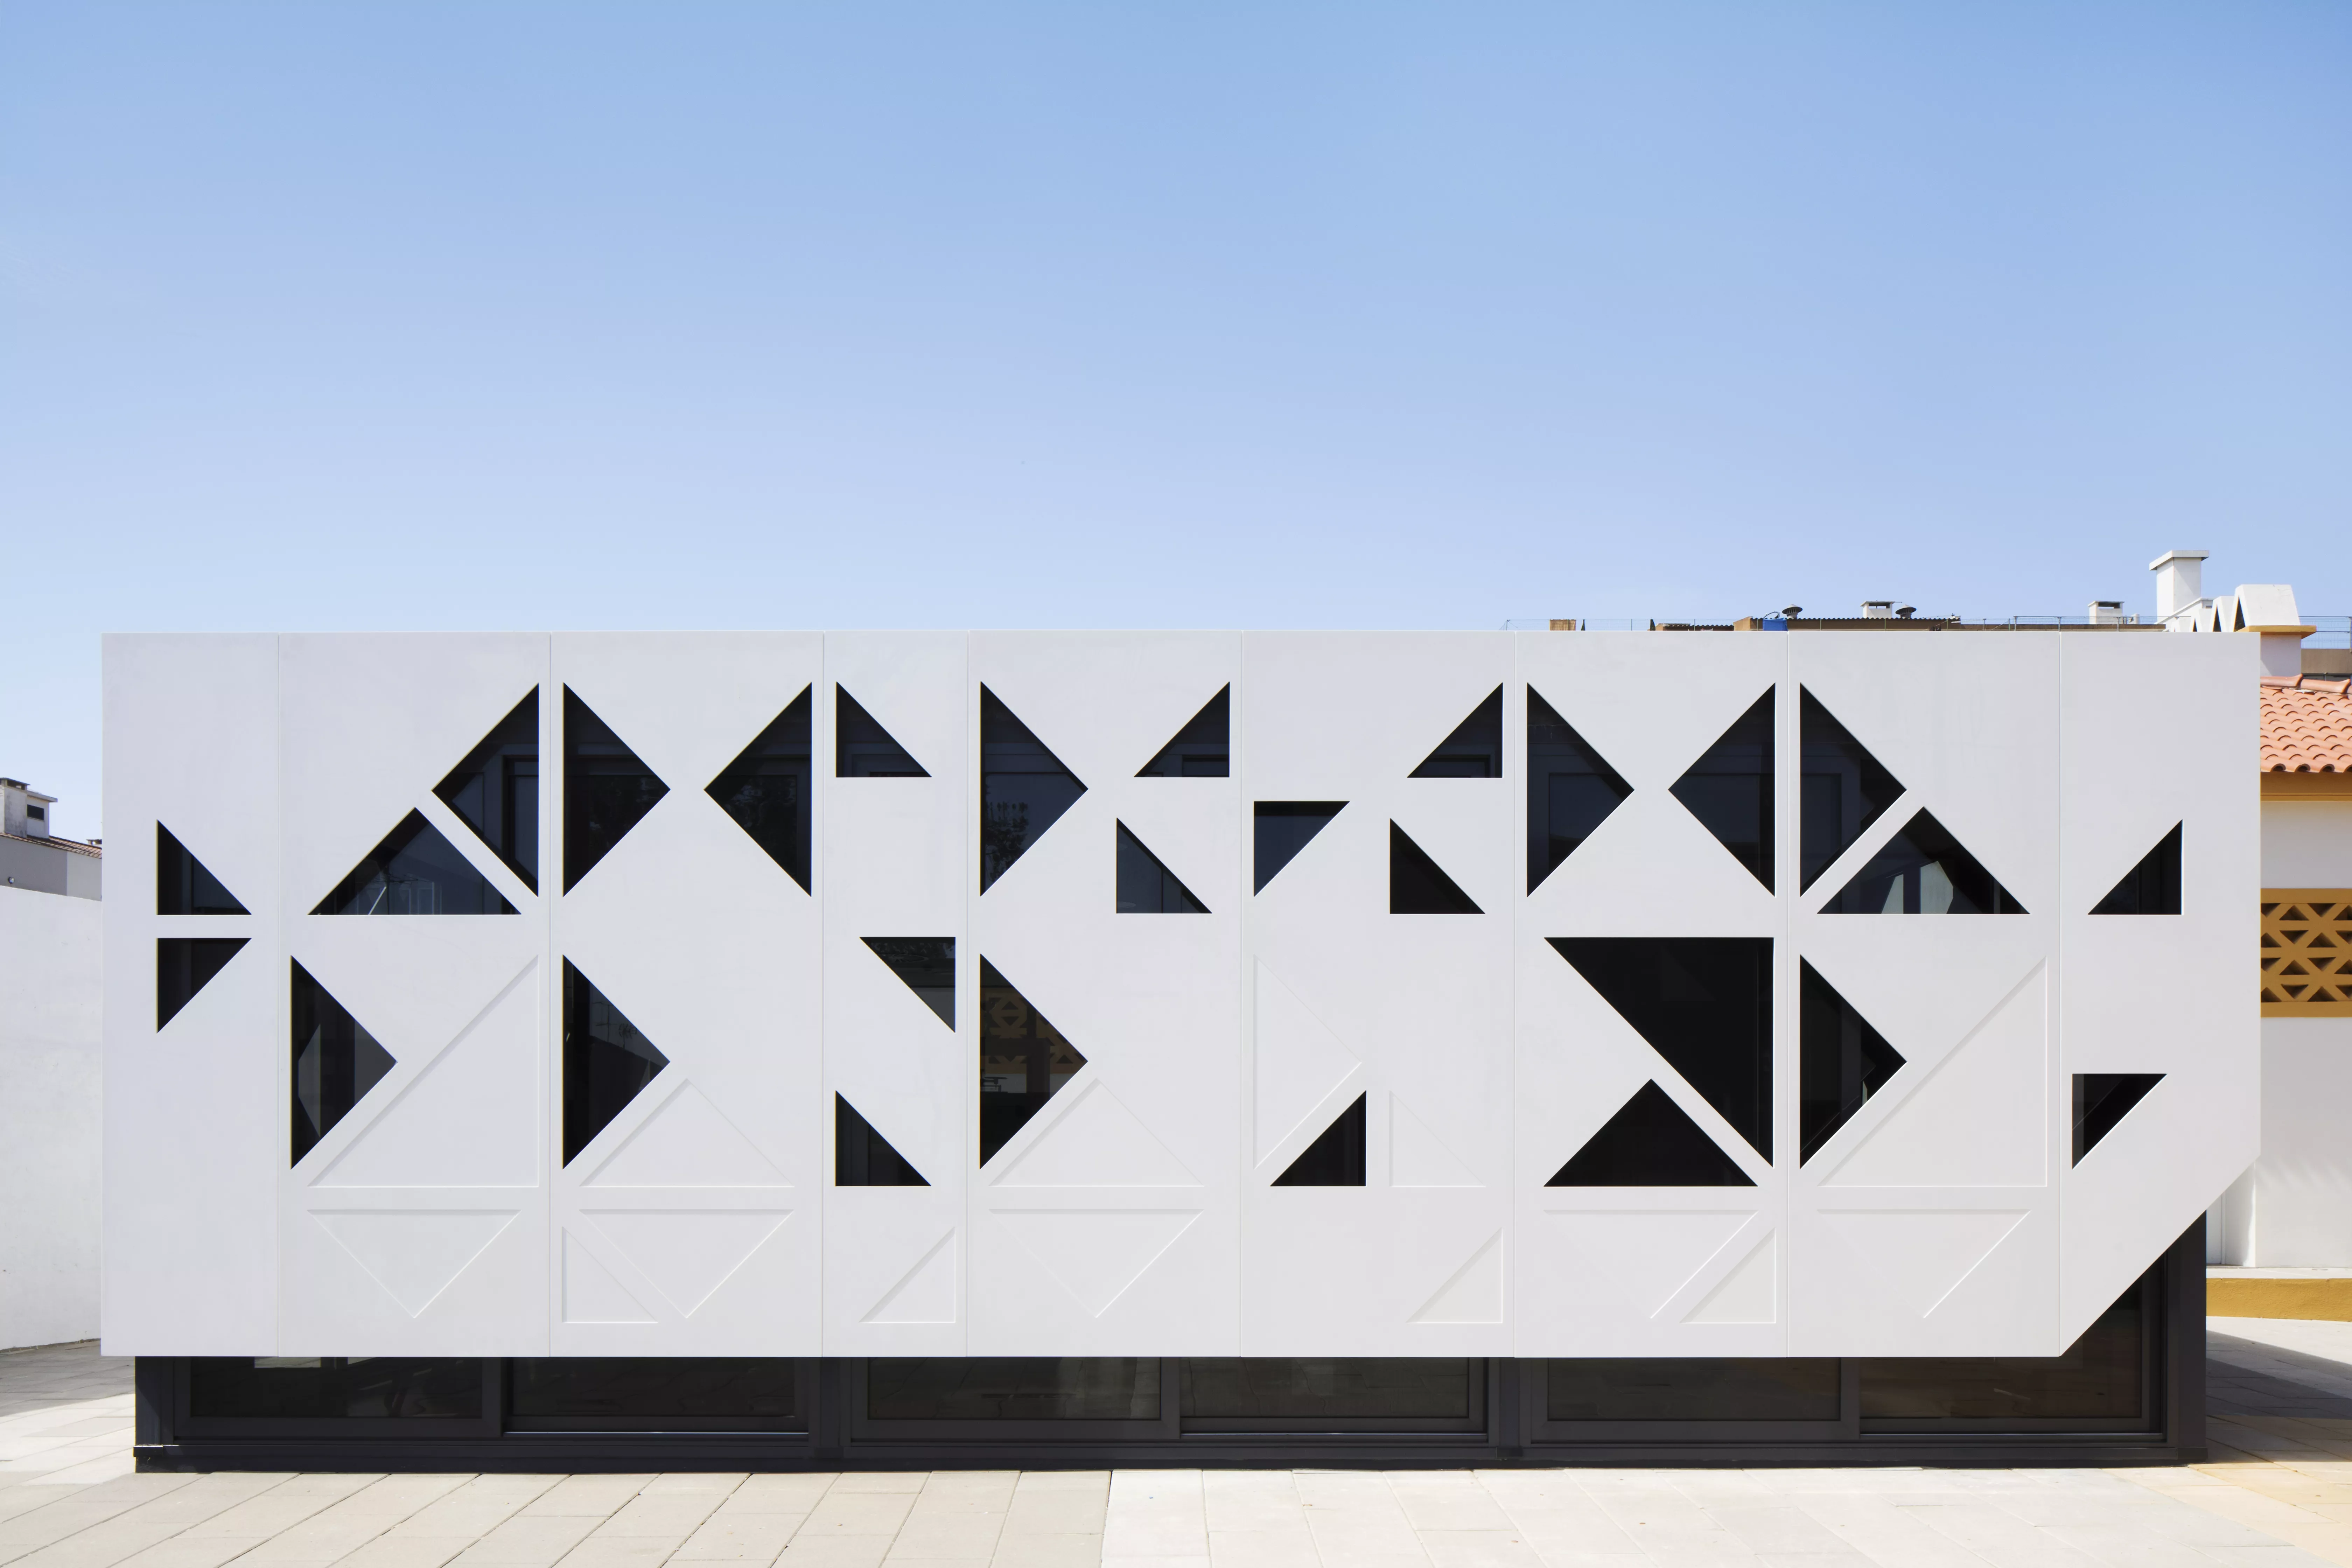 Spectacular HIMACS façade: traditional school architecture meets high-tech material 